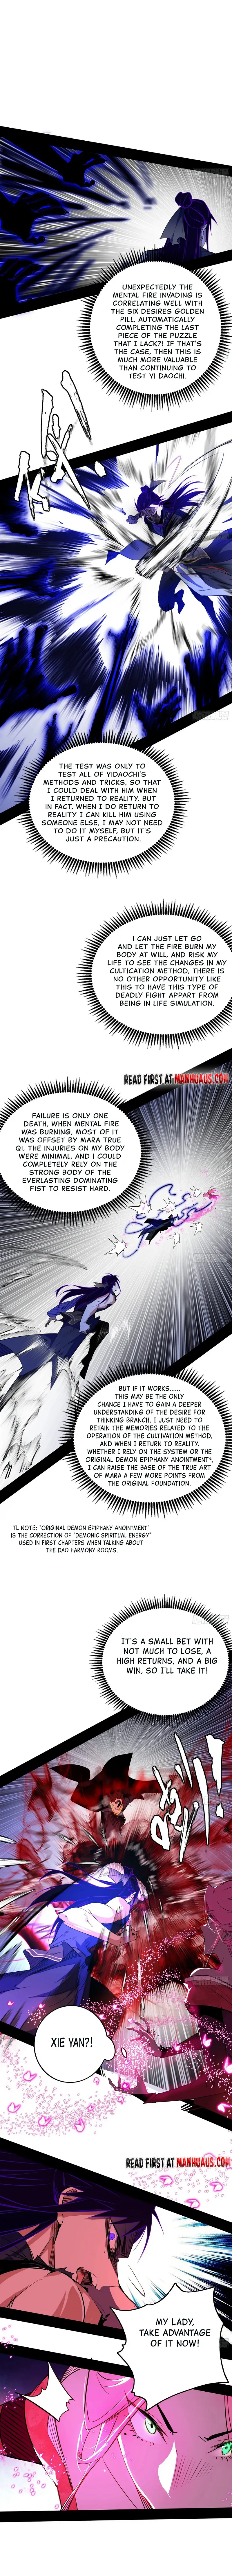 I'm An Evil God Chapter 292 page 2 - MangaWeebs.in